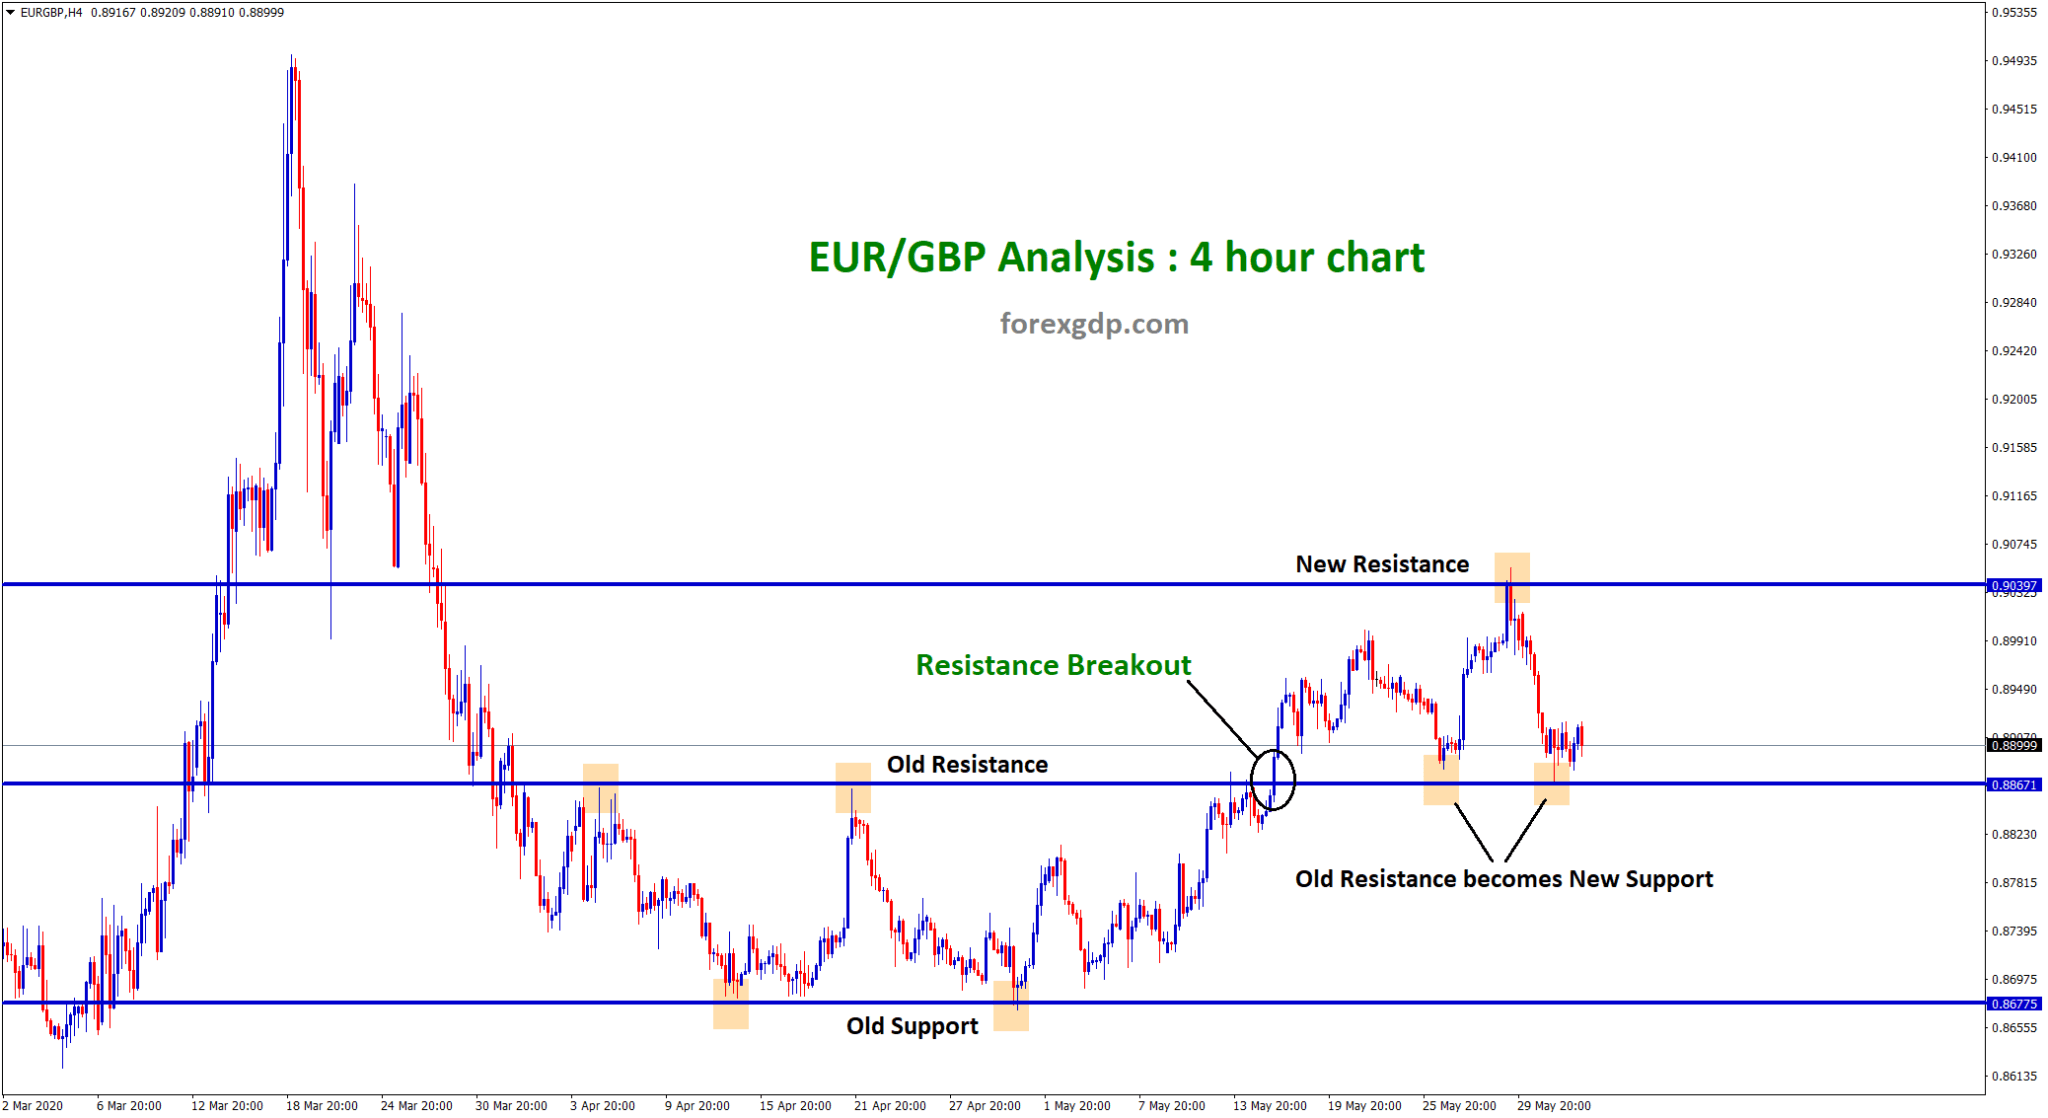 old resistance becomes new support in EURGBP h4